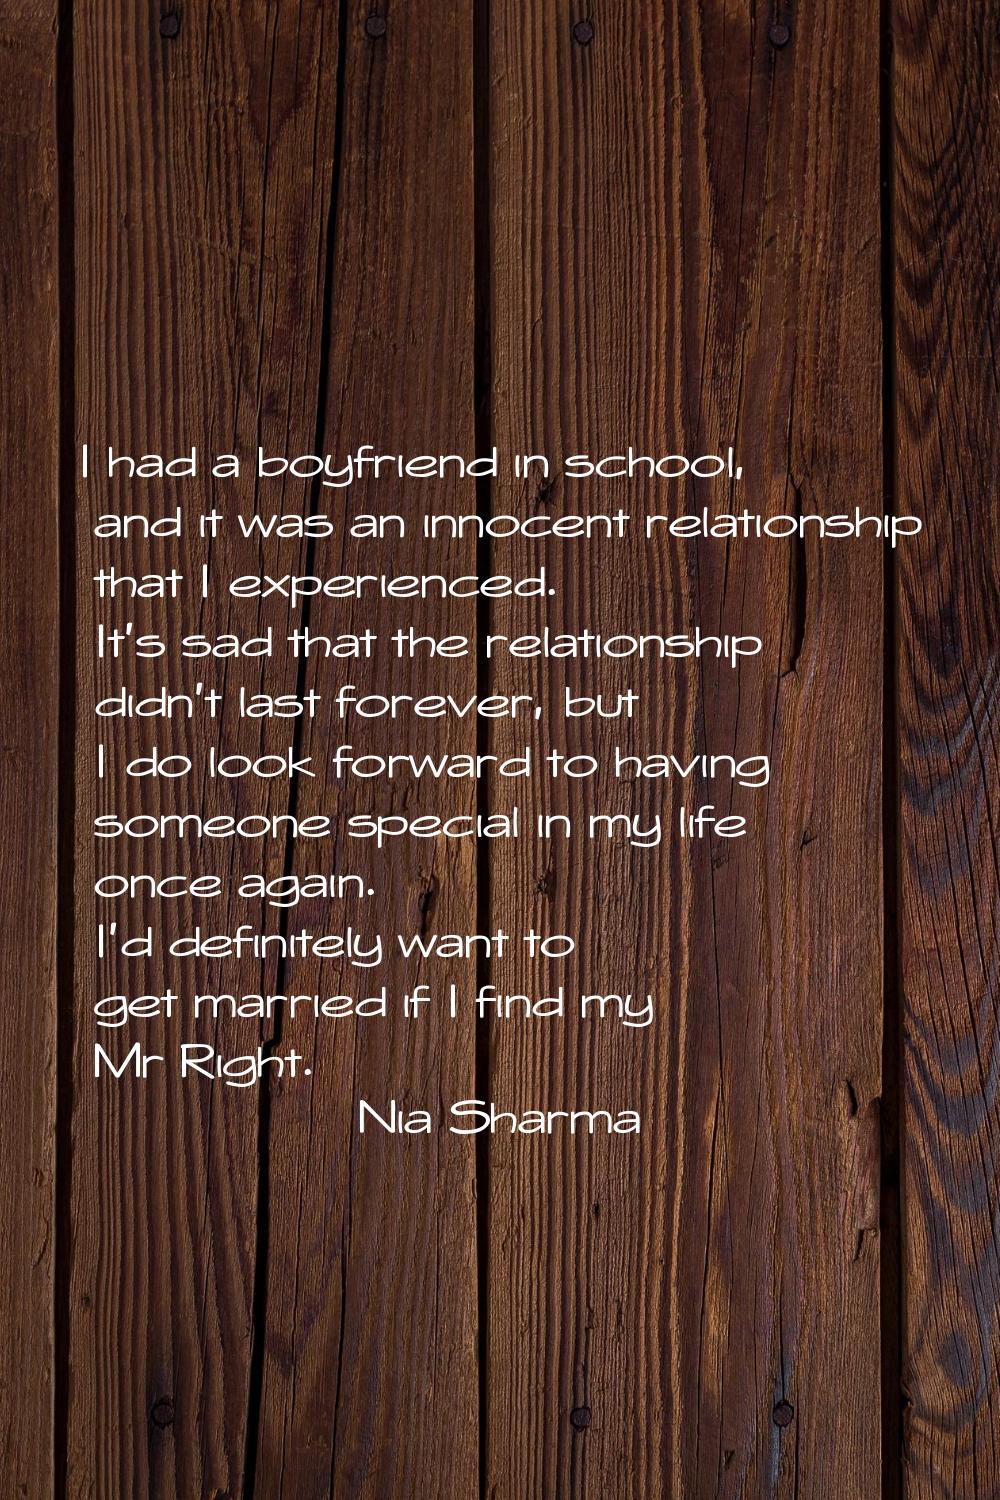 I had a boyfriend in school, and it was an innocent relationship that I experienced. It's sad that 